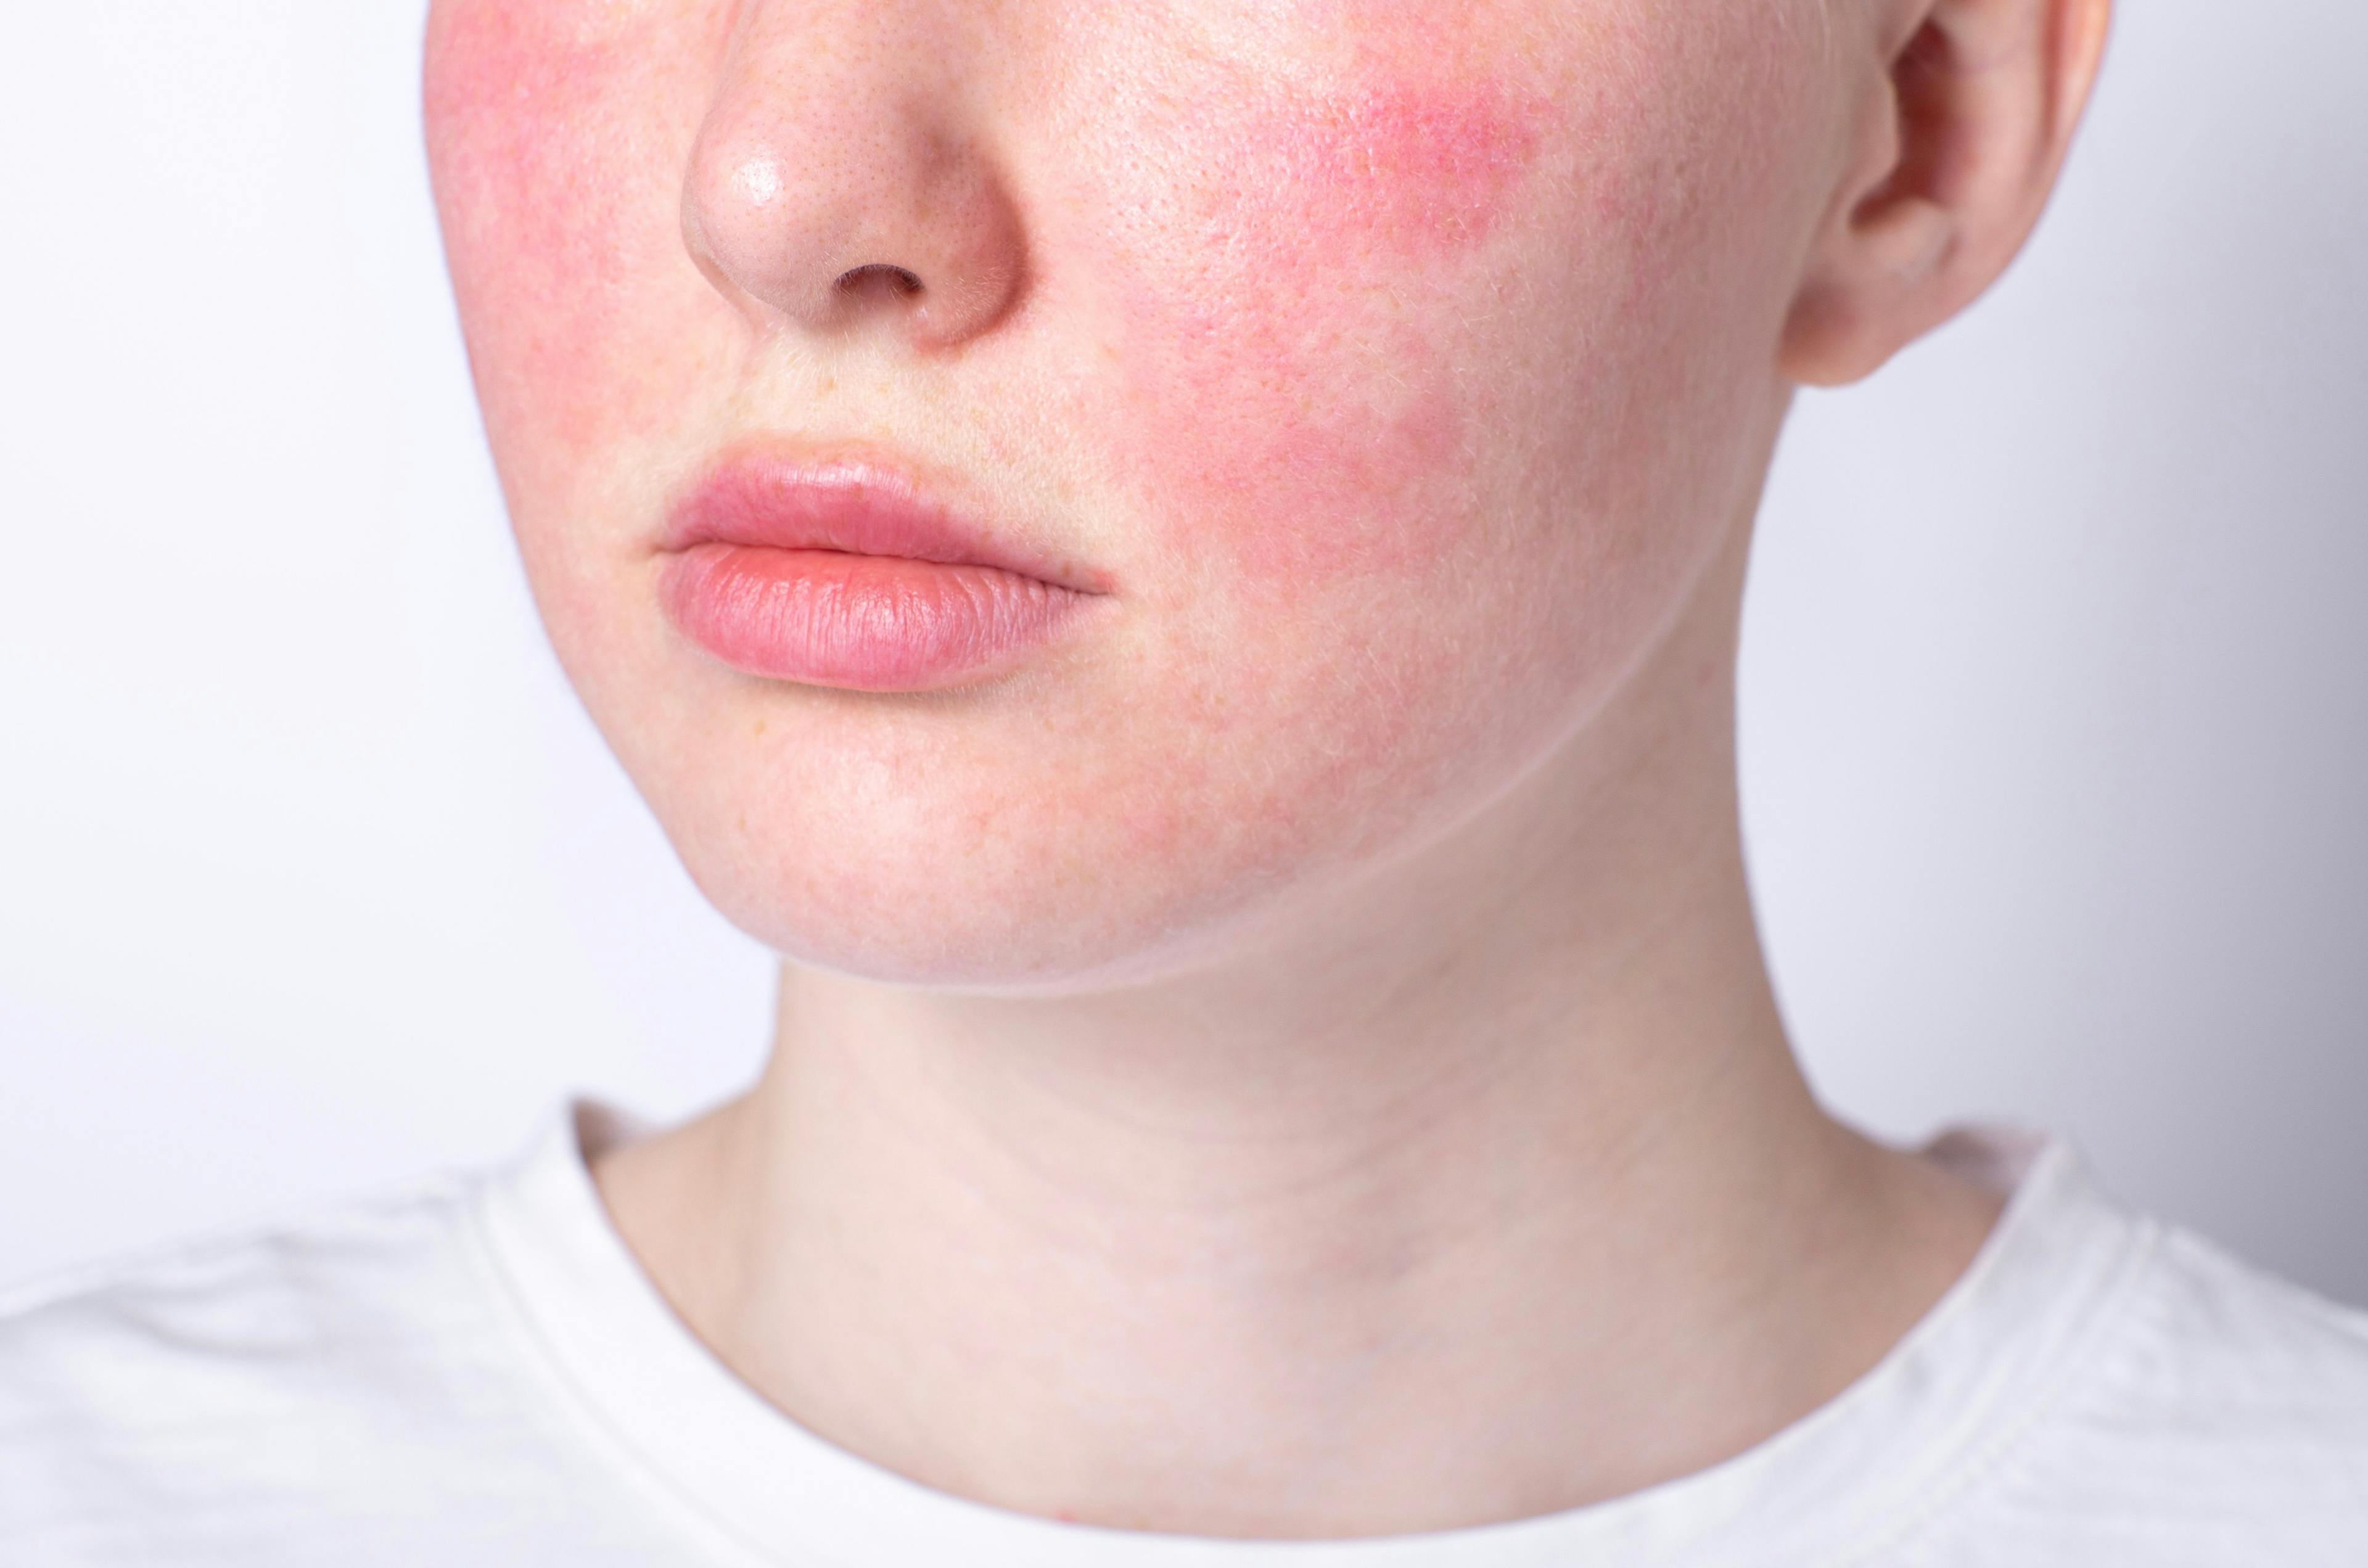 Patient with rosacea | Image Credit: © iso100production - stock.adobe.com